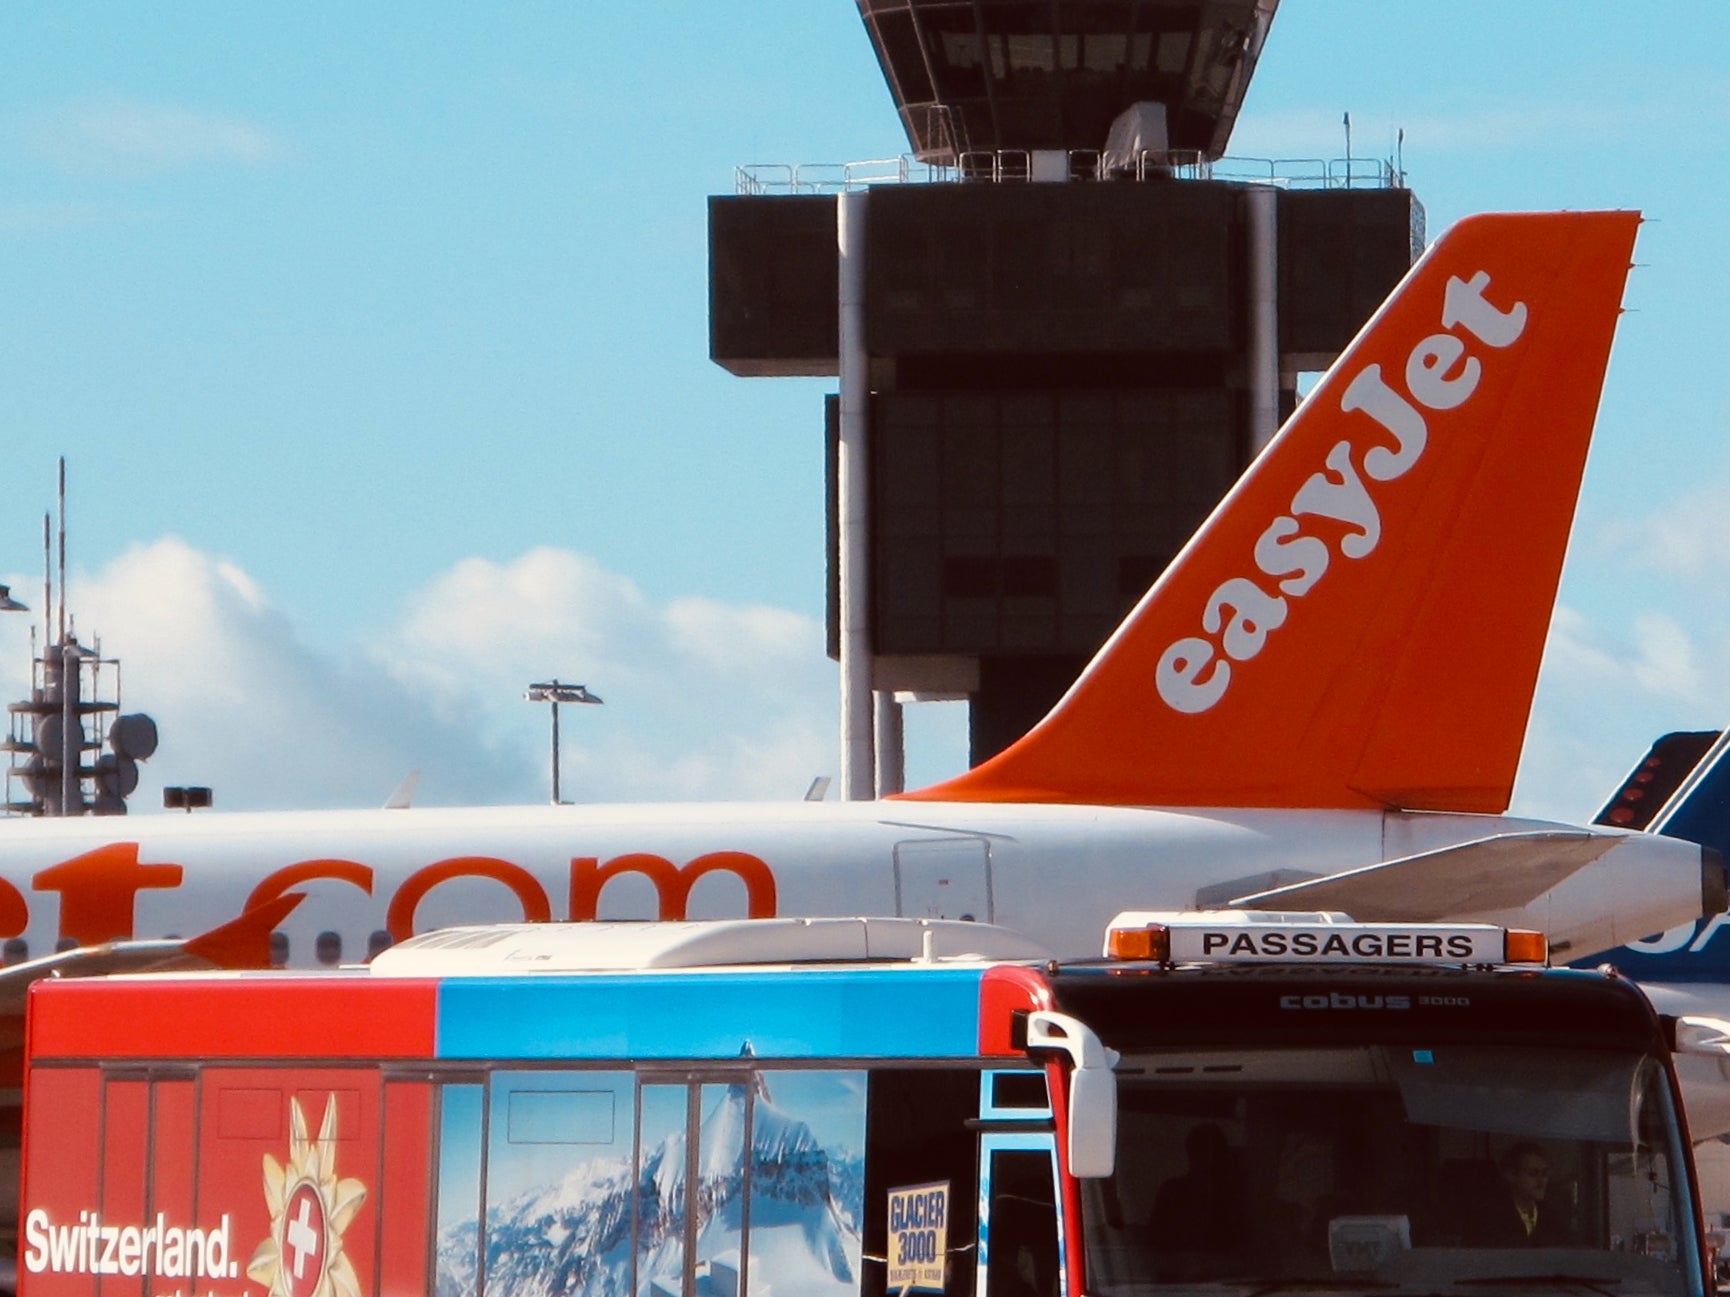 Final destination: easyJet aircraft at Geneva airport in Switzerland, where the flight from Edinburgh landed safely (file photo)